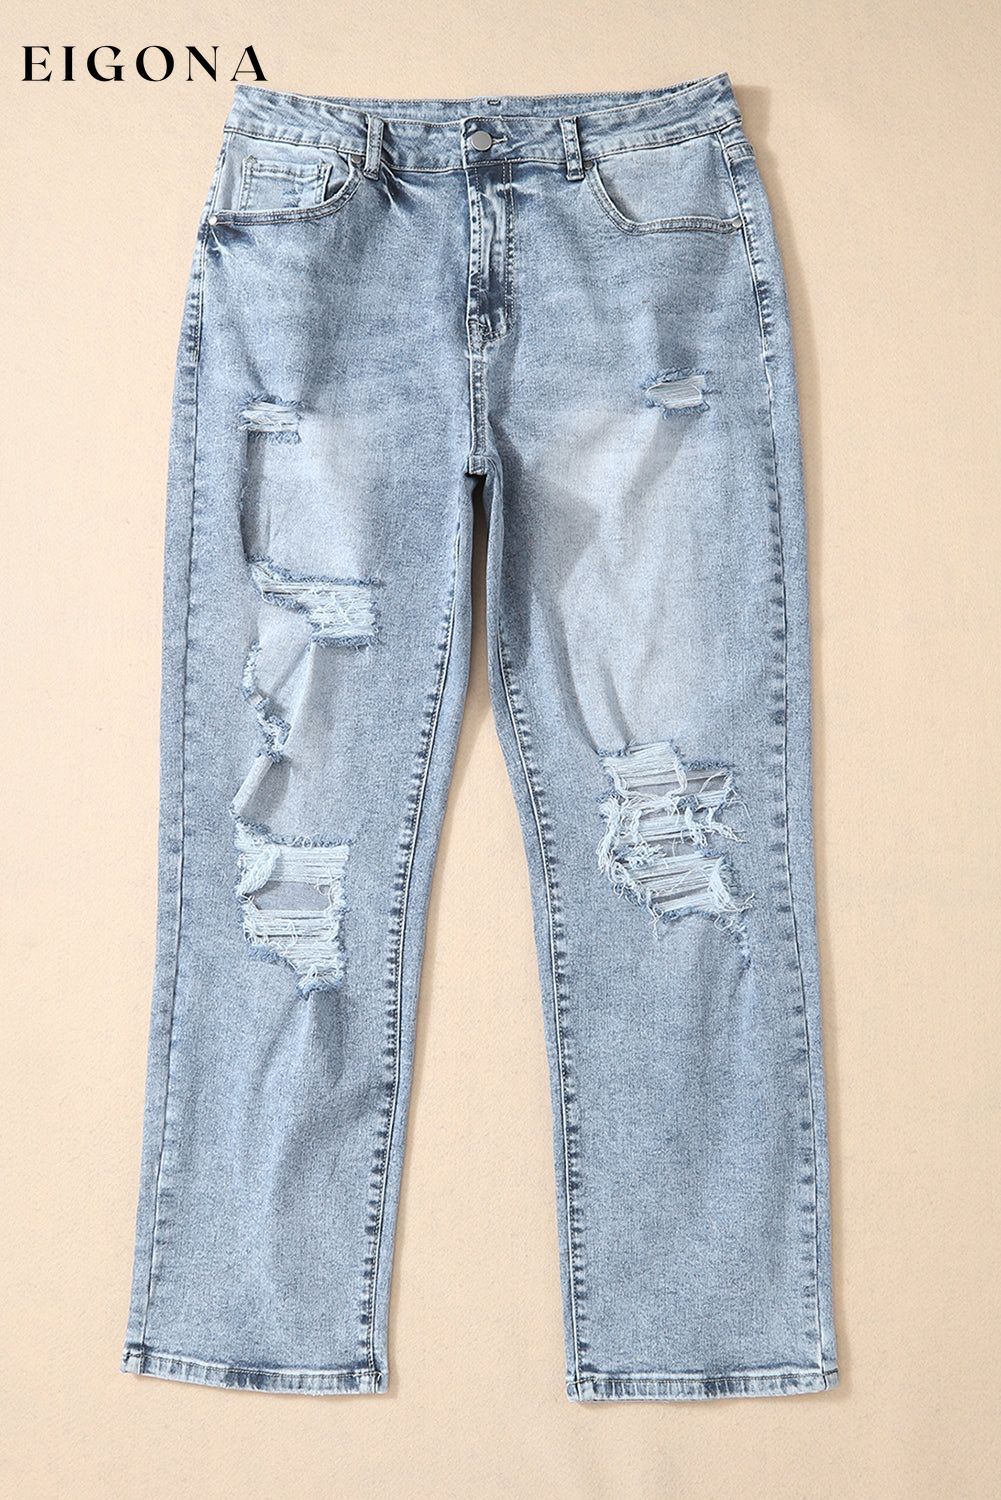 Sky Blue Light Wash Frayed Slim Fit High Waist Jeans All In Stock Best Sellers bottoms clothes Color Blue Craft Distressed Fabric Denim jeans pants ripped jeans Season Spring Style Western